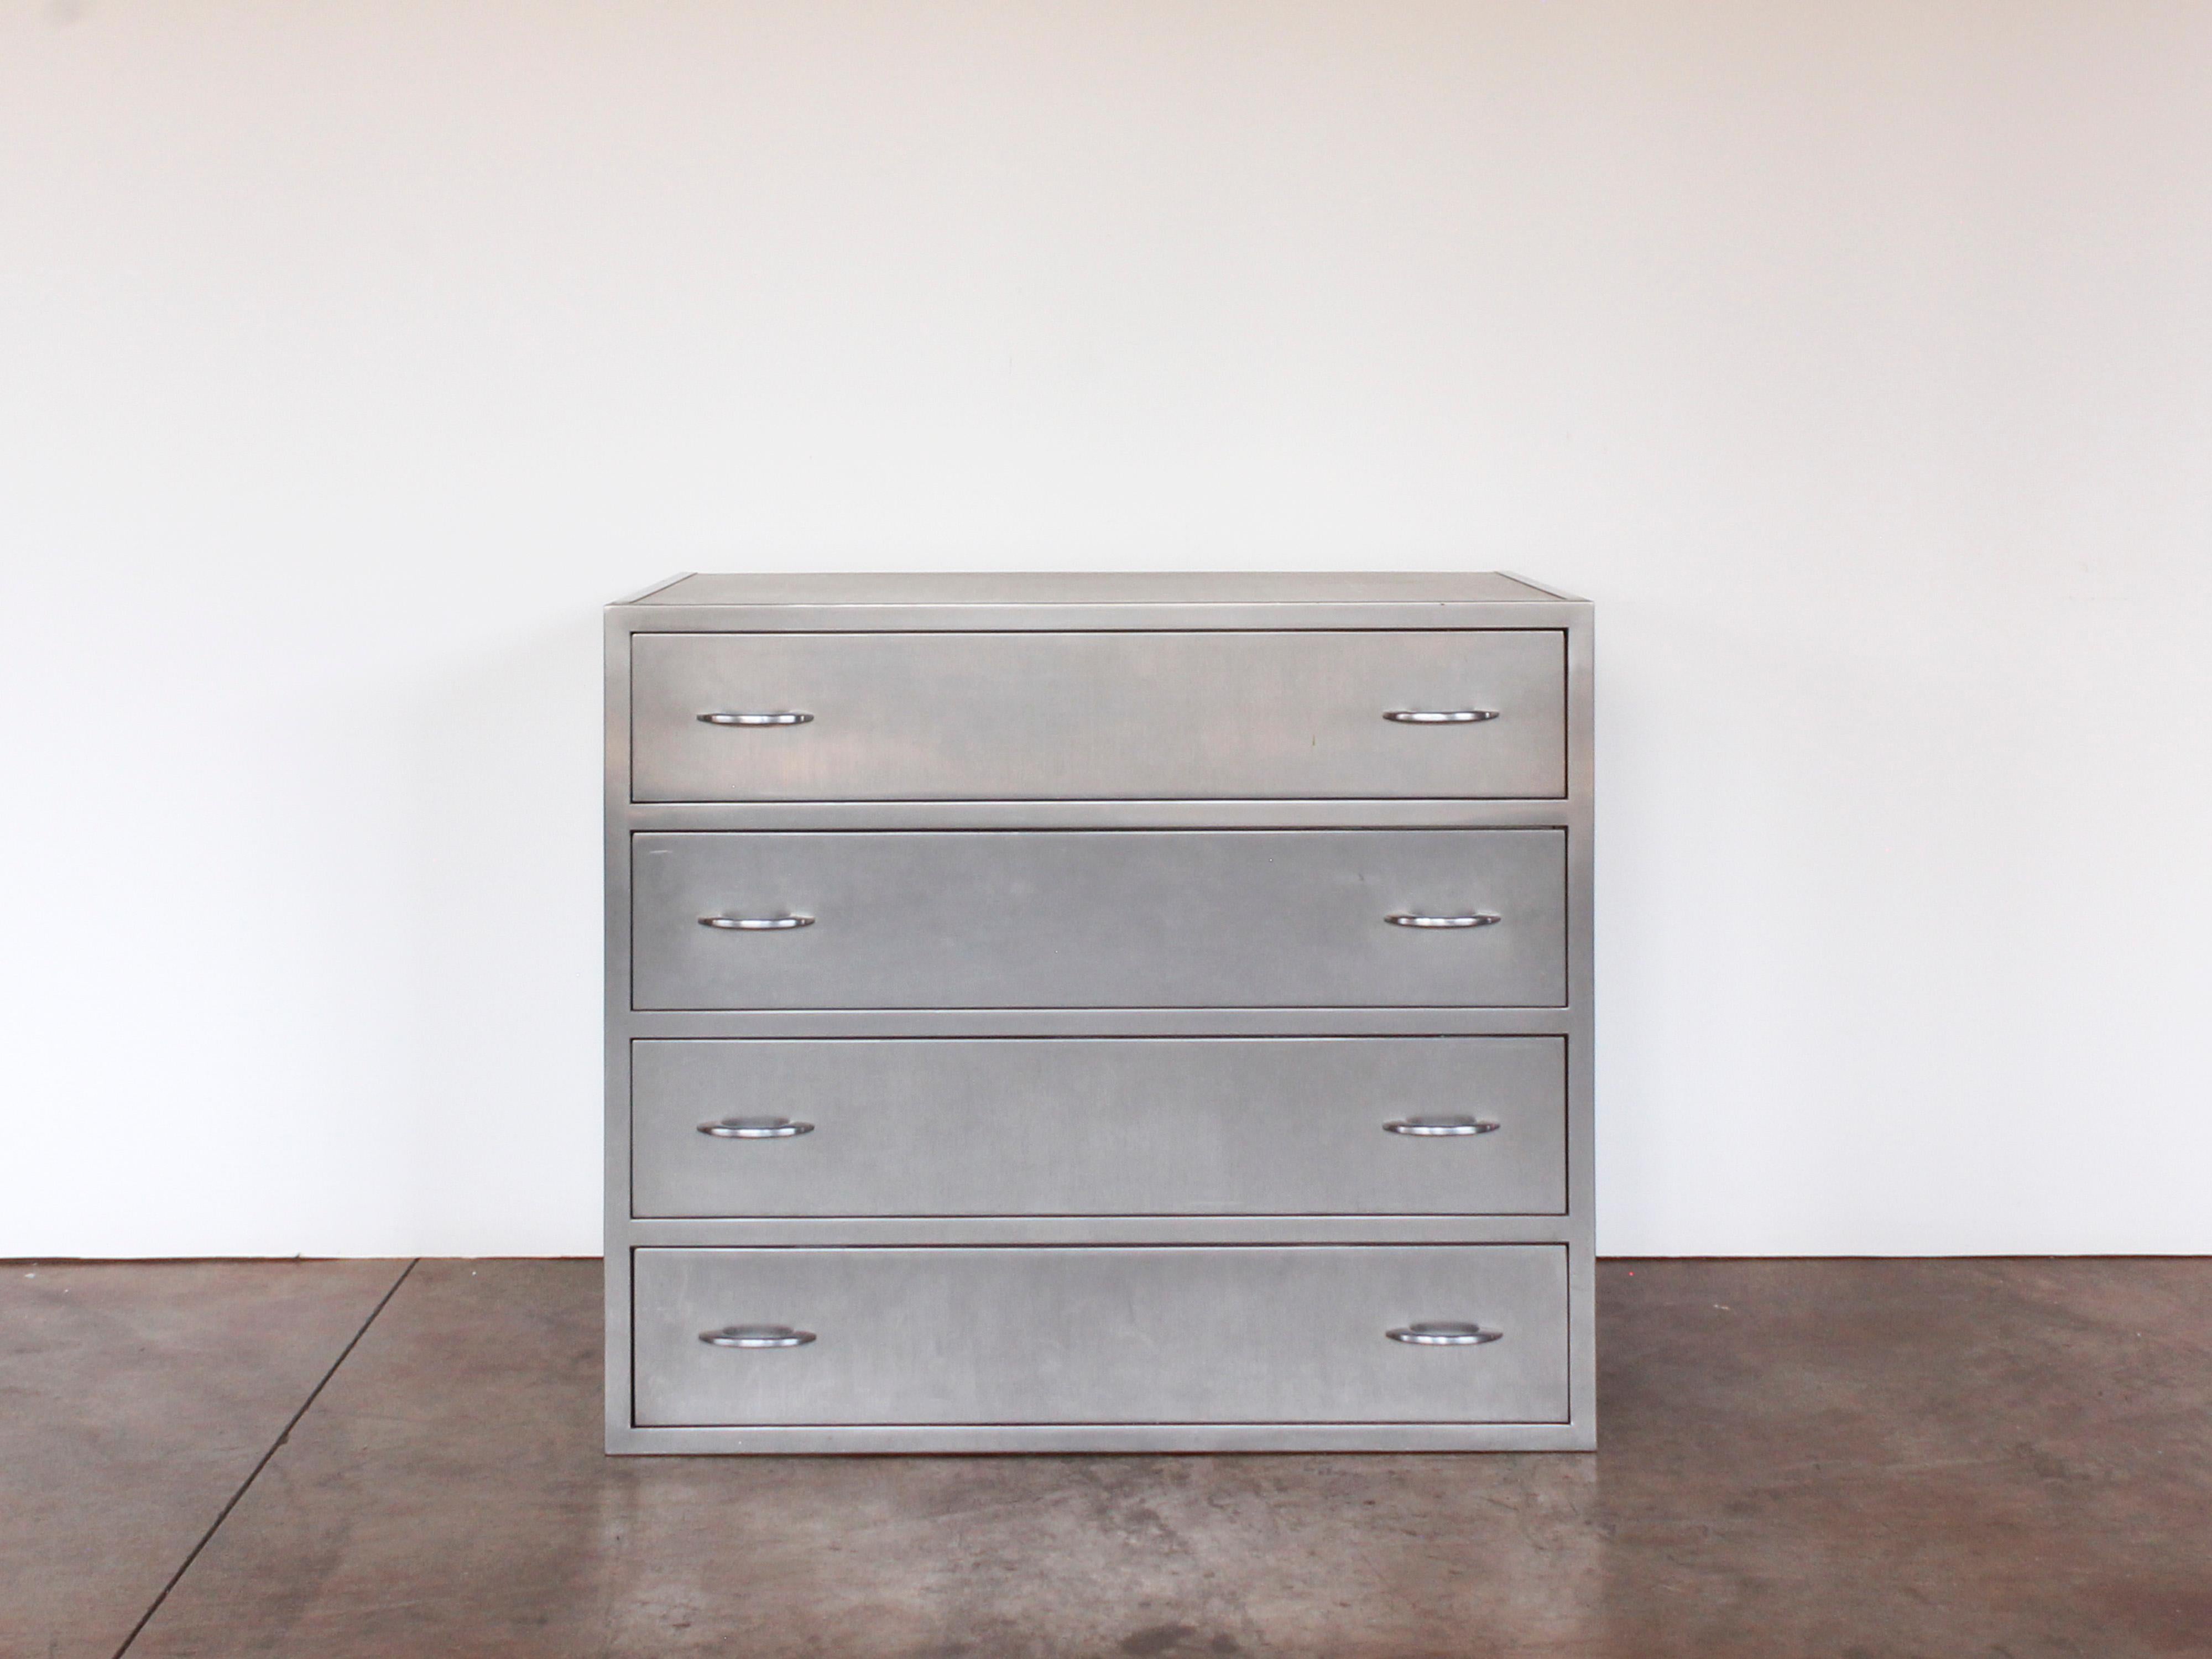 American Industrial Stainless Steel Chest or Dresser with 4 Drawers, c. 1940s. Drawer: 19.5